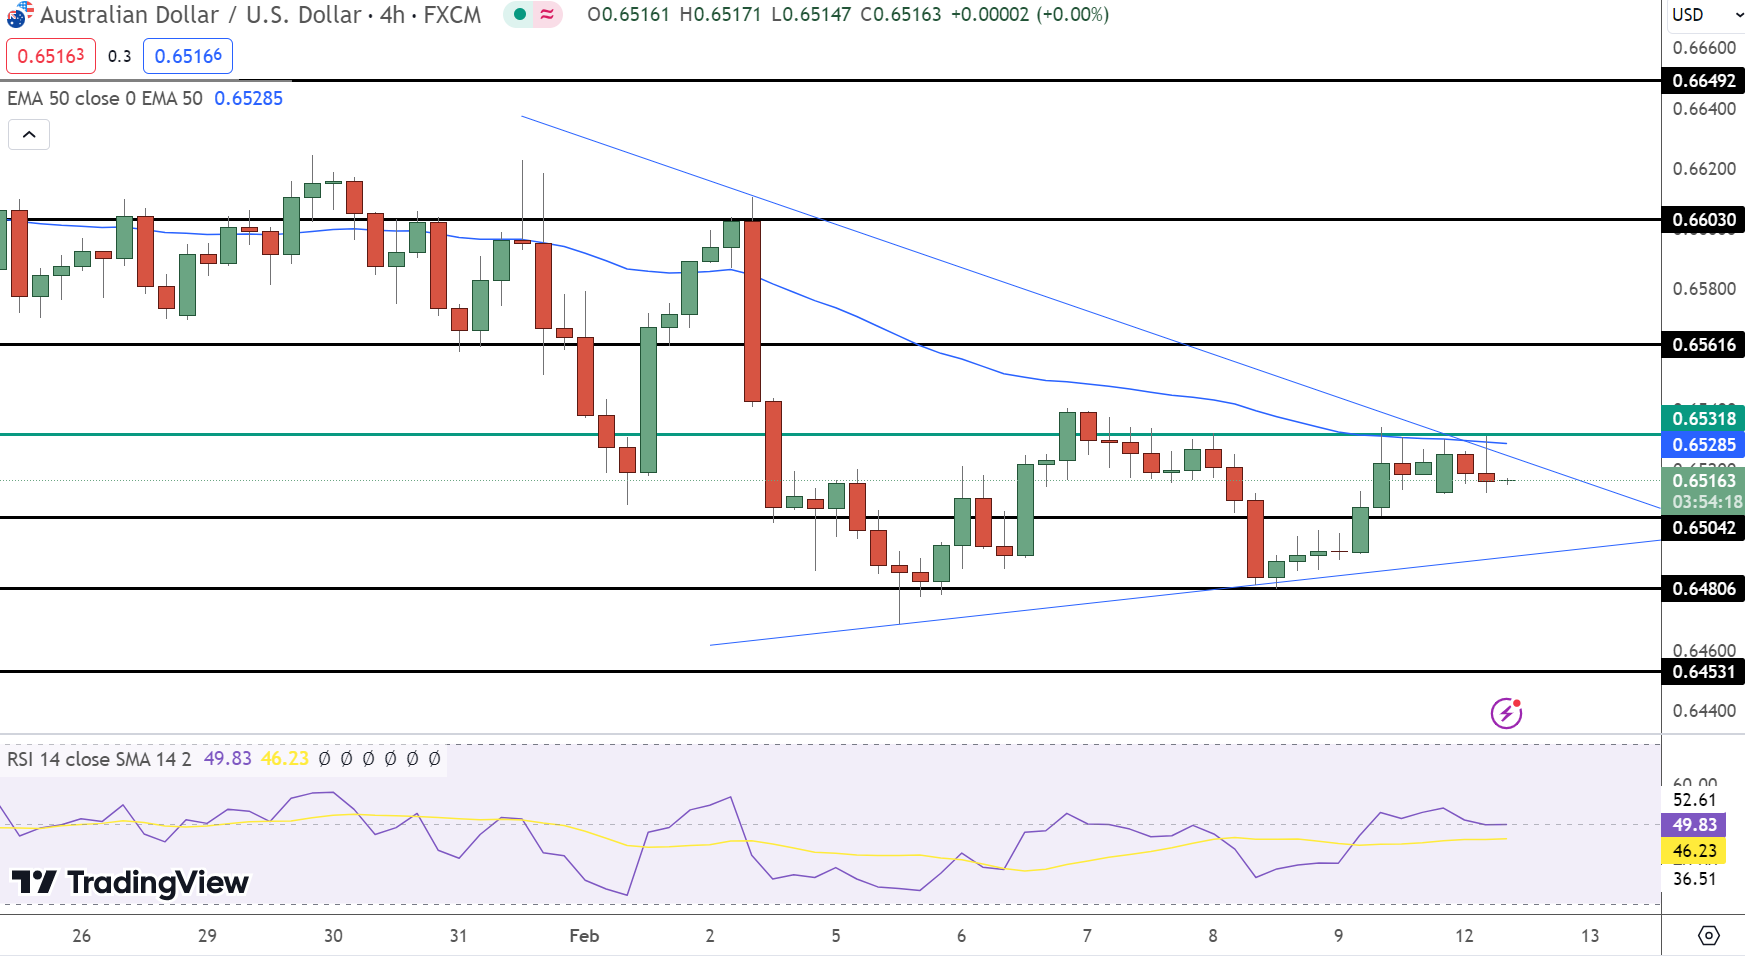 AUD/USD Price Forecast: Retail Sales Up but Faces 0.6520 Resistance